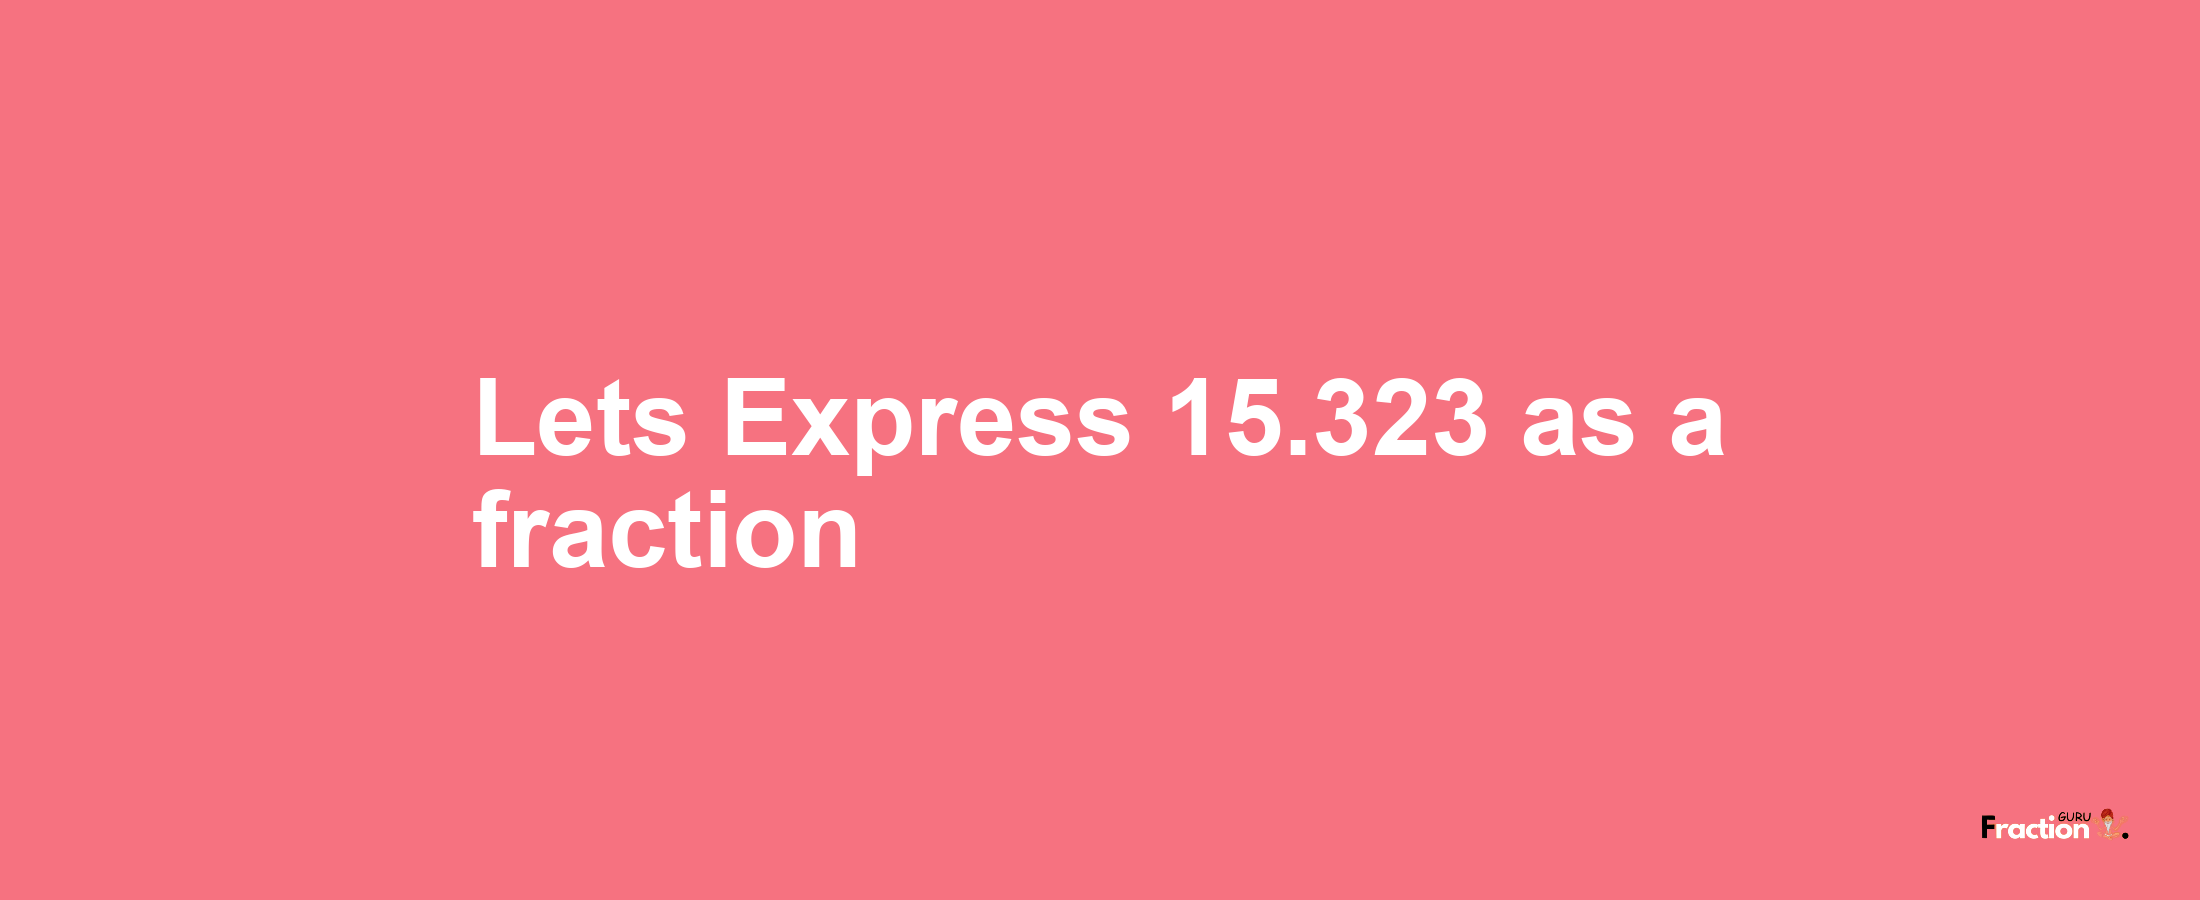 Lets Express 15.323 as afraction